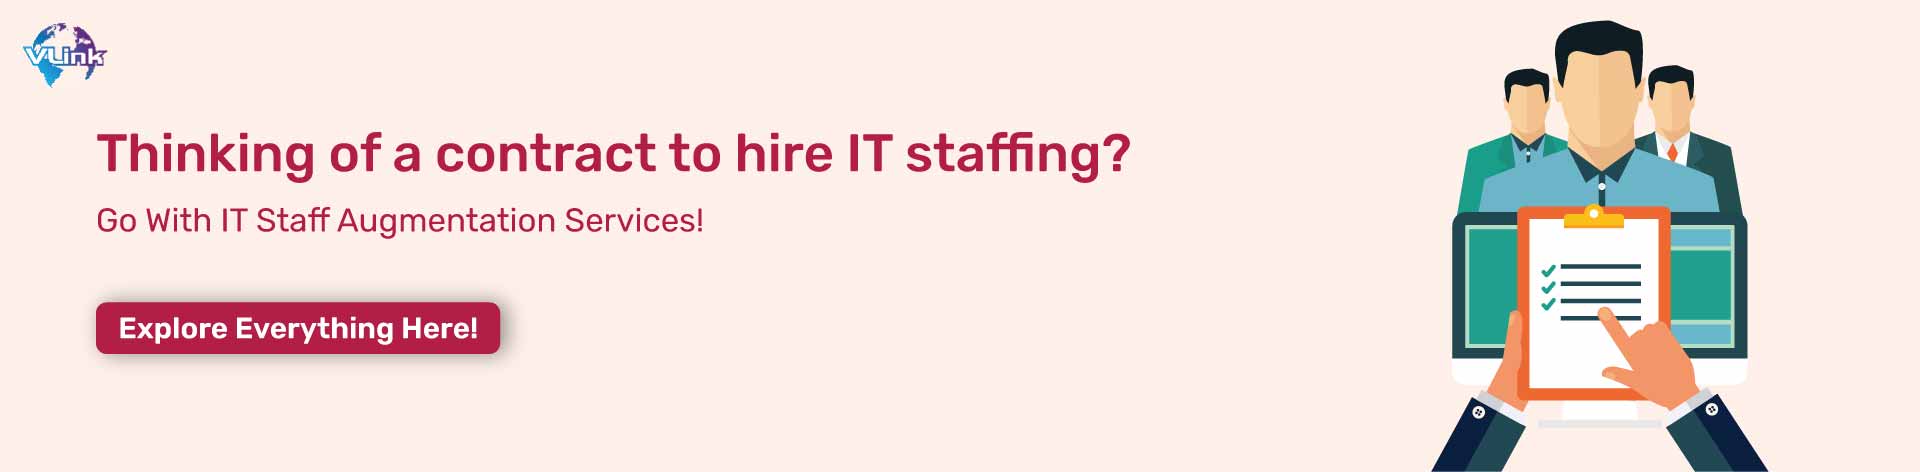 why-it-staffing-is-beneficial-for-business-cta